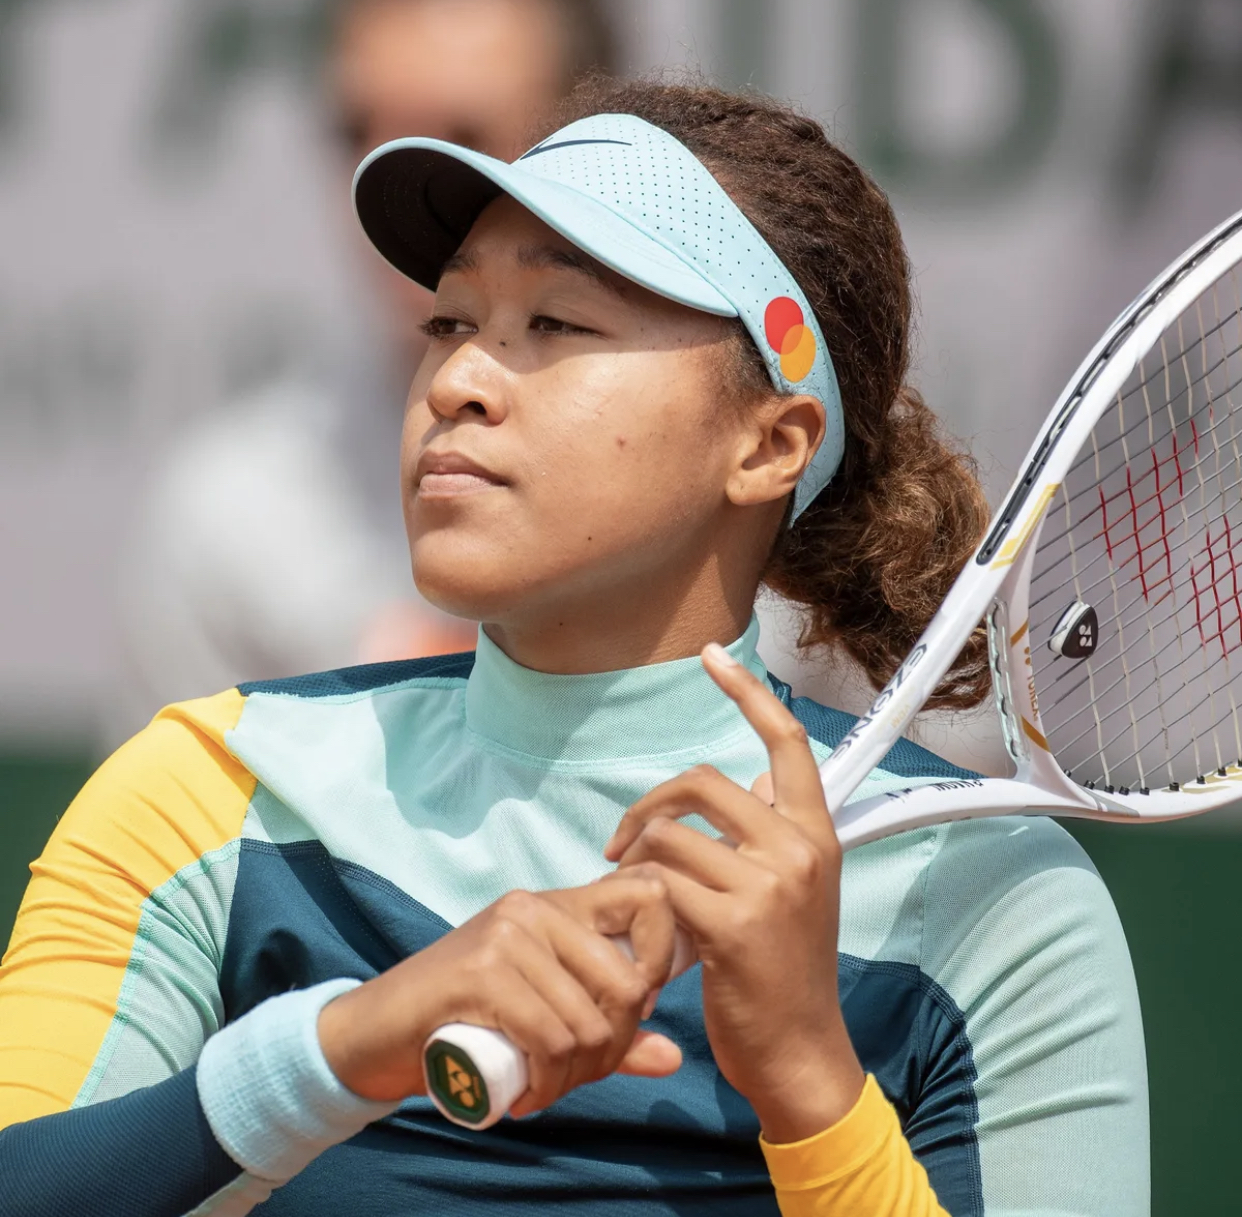 Overwhelming global outpour of Support for Naomi Osaka as tennis leaders pledge to address Naomi Osaka's Concern.